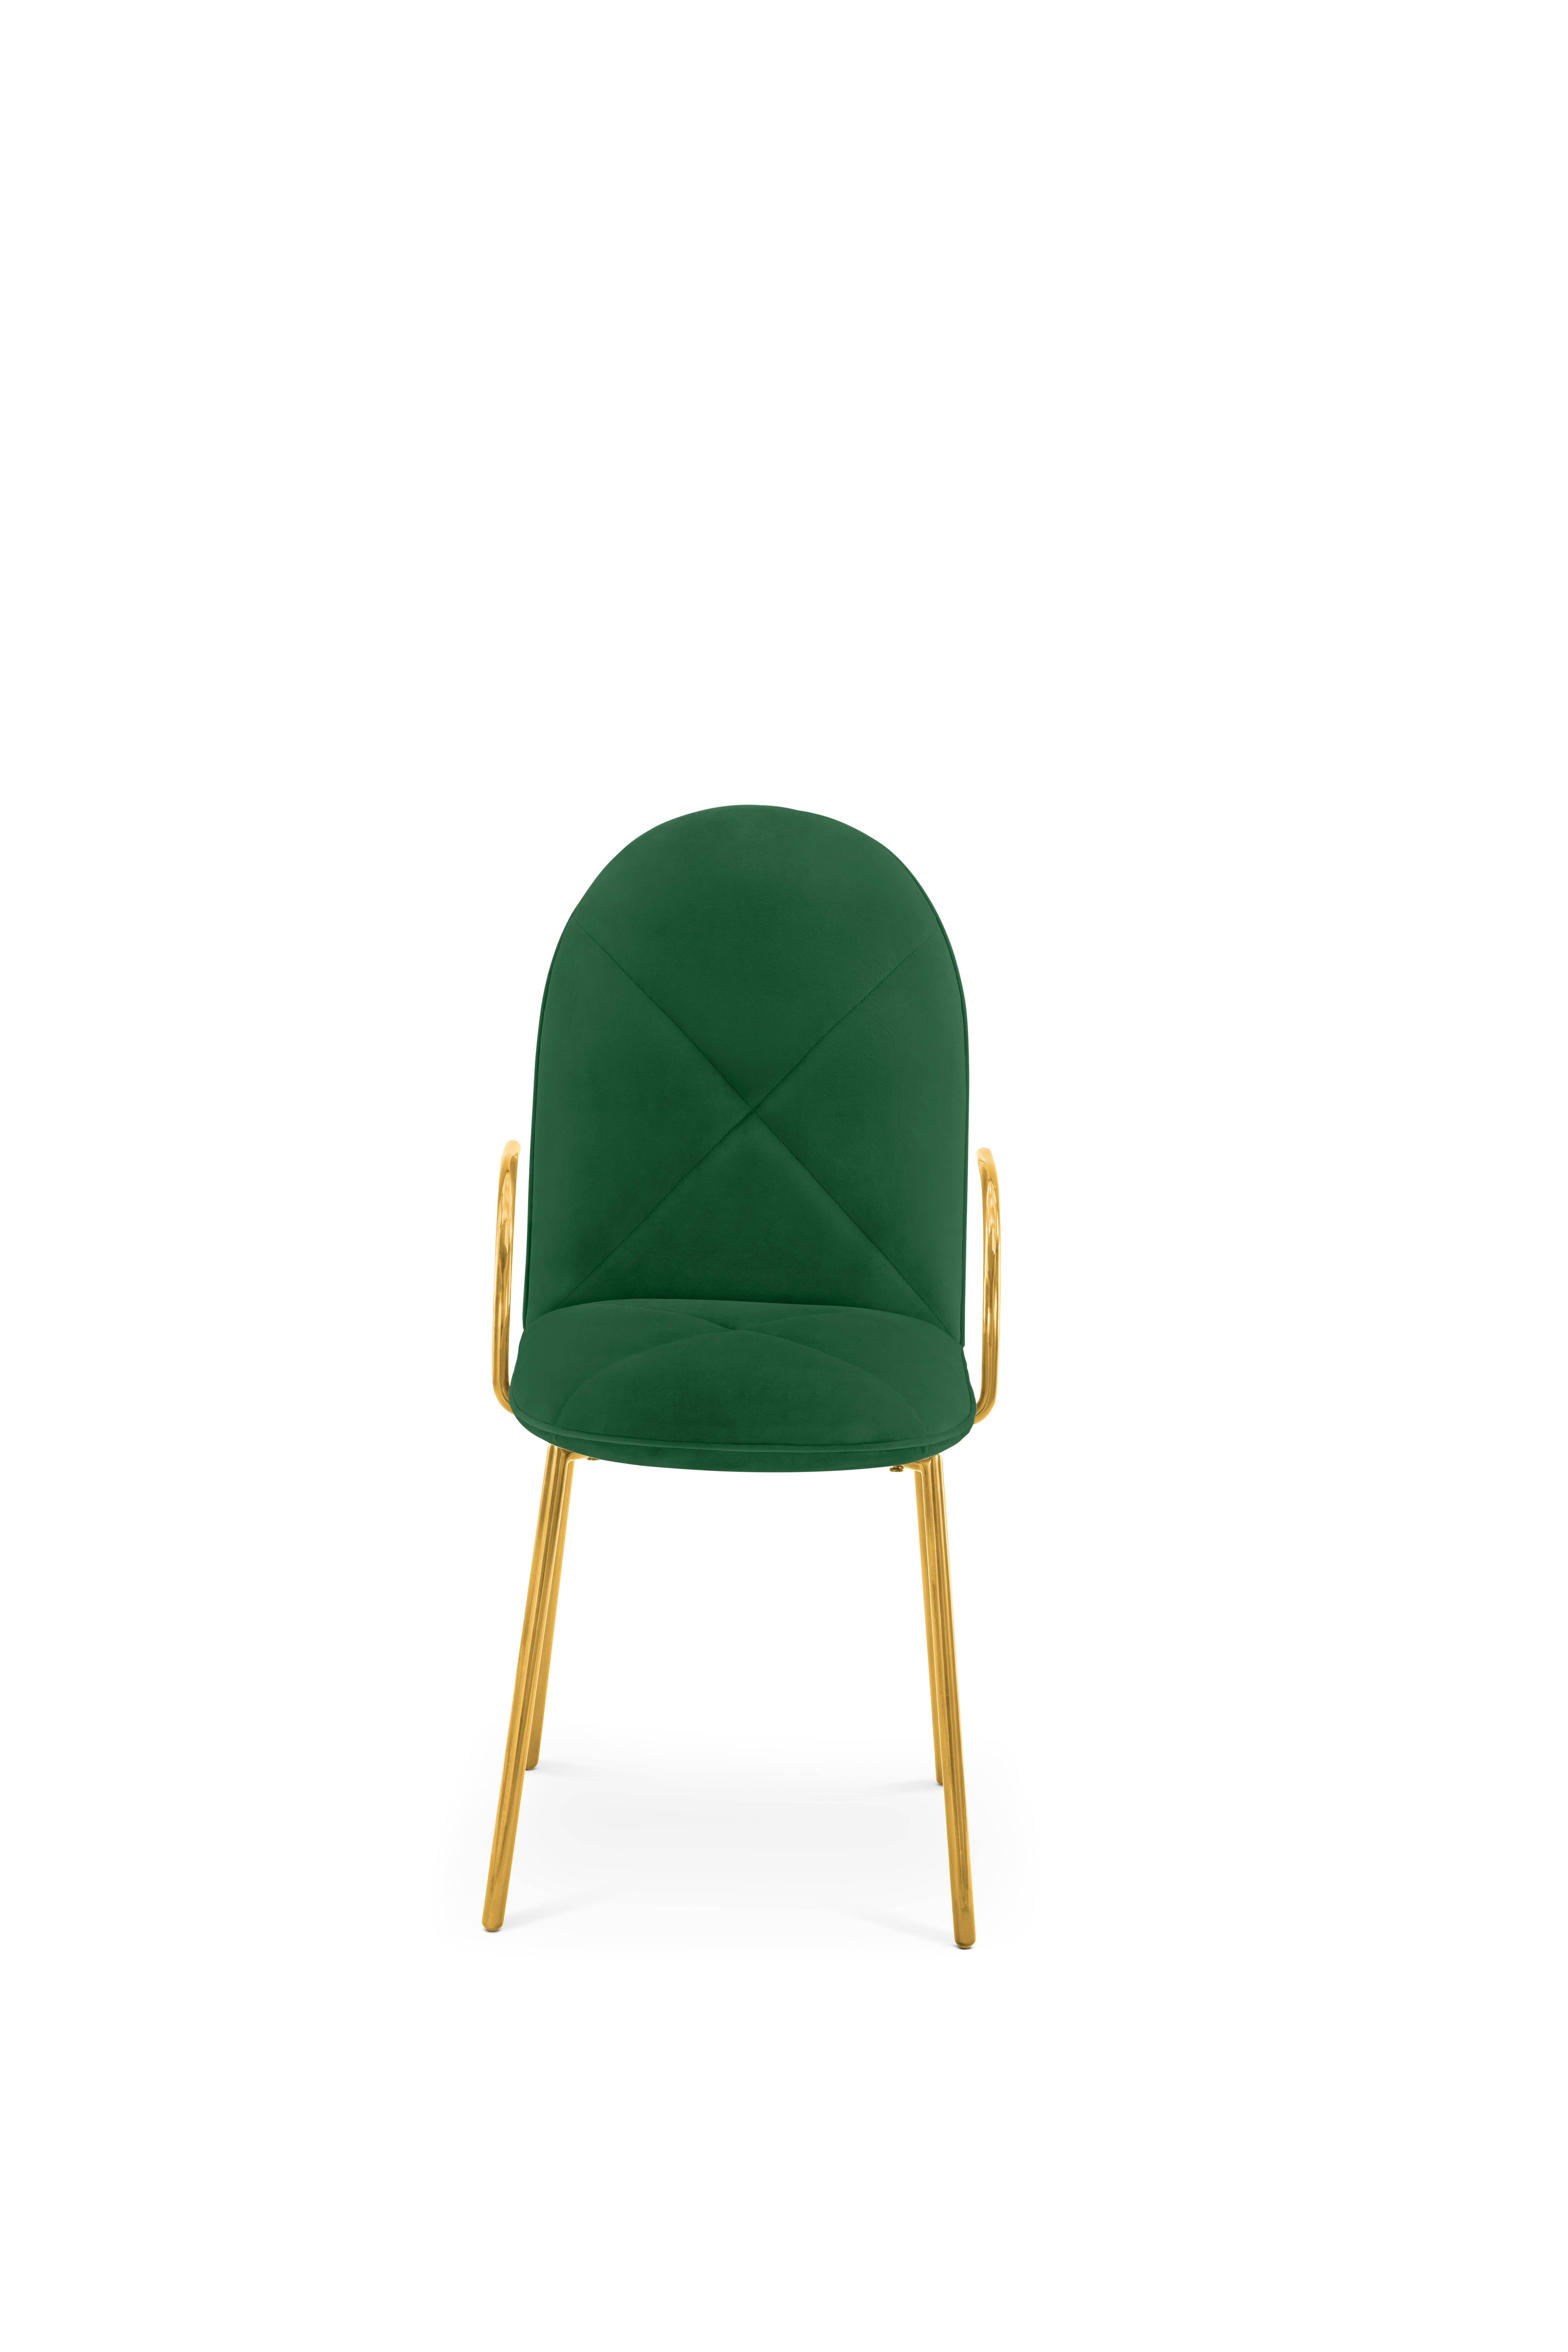 Orion chair green by Nika Zupanc for Scarlet Splendour

The 88 constellations of the universe mysterious and magical, holding a promise to guide our destinies. Little wonder that they are the muse for the 88 Secrets, Nika Zupanc’s debut collection